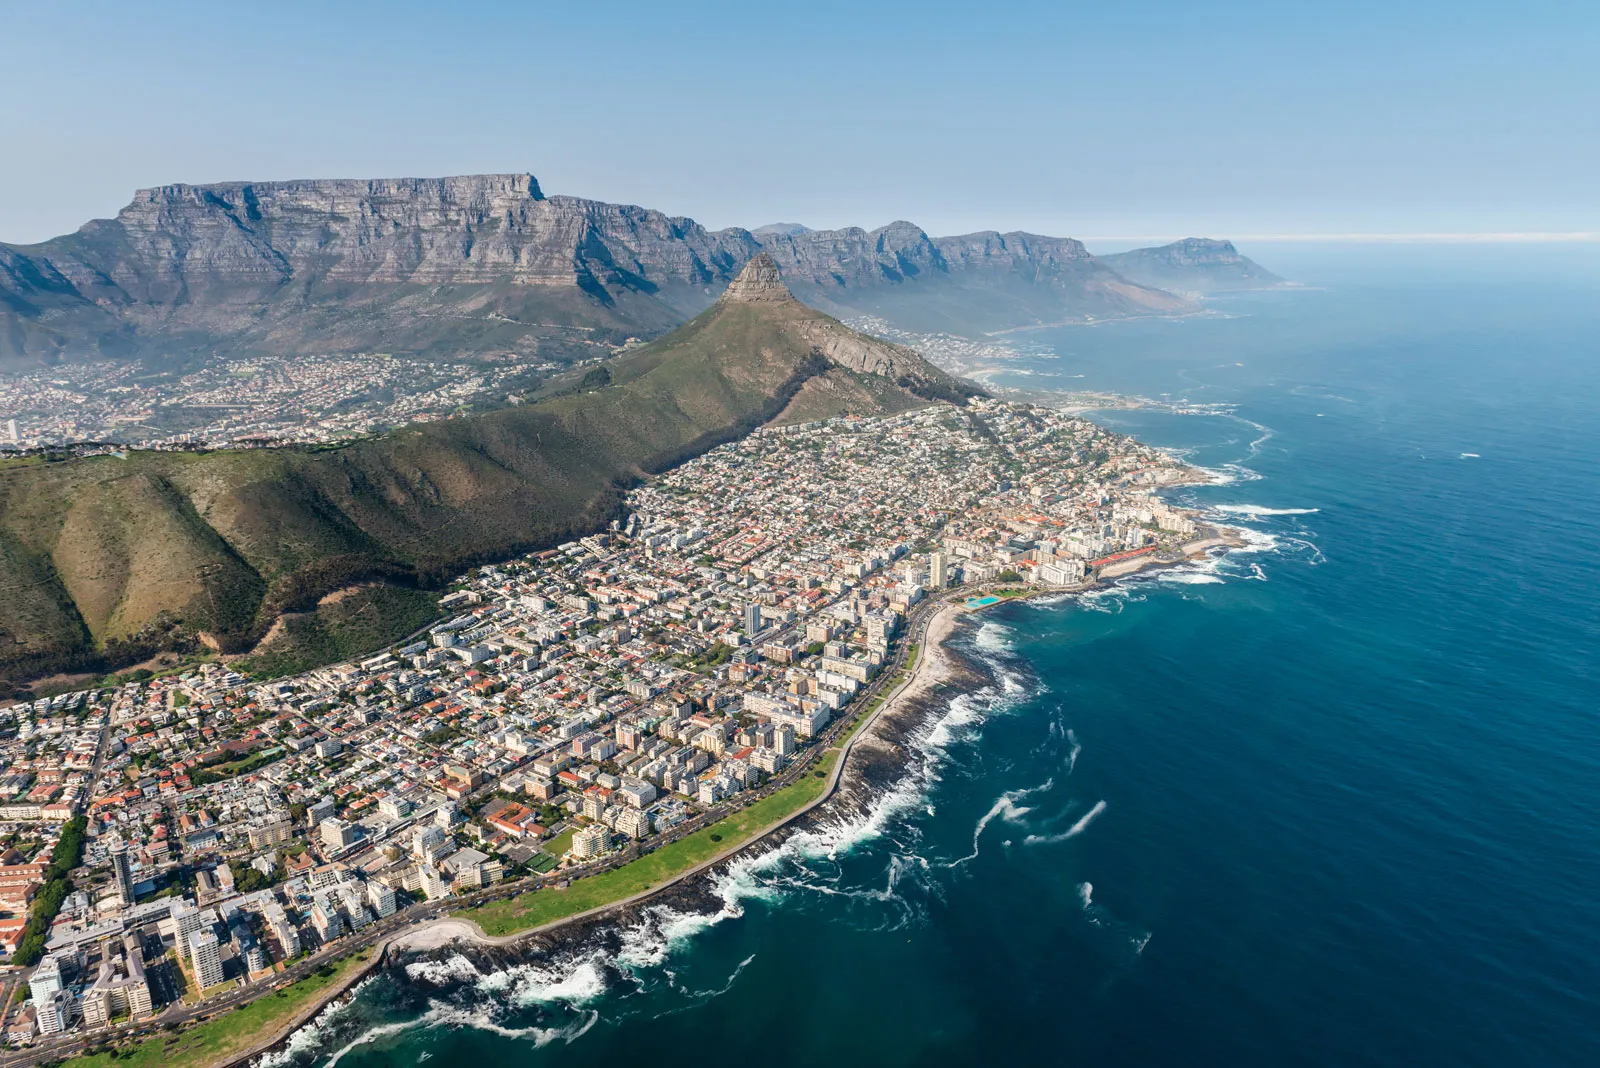 Cape Town, South Africa: A Jewel at the Tip of the Continent